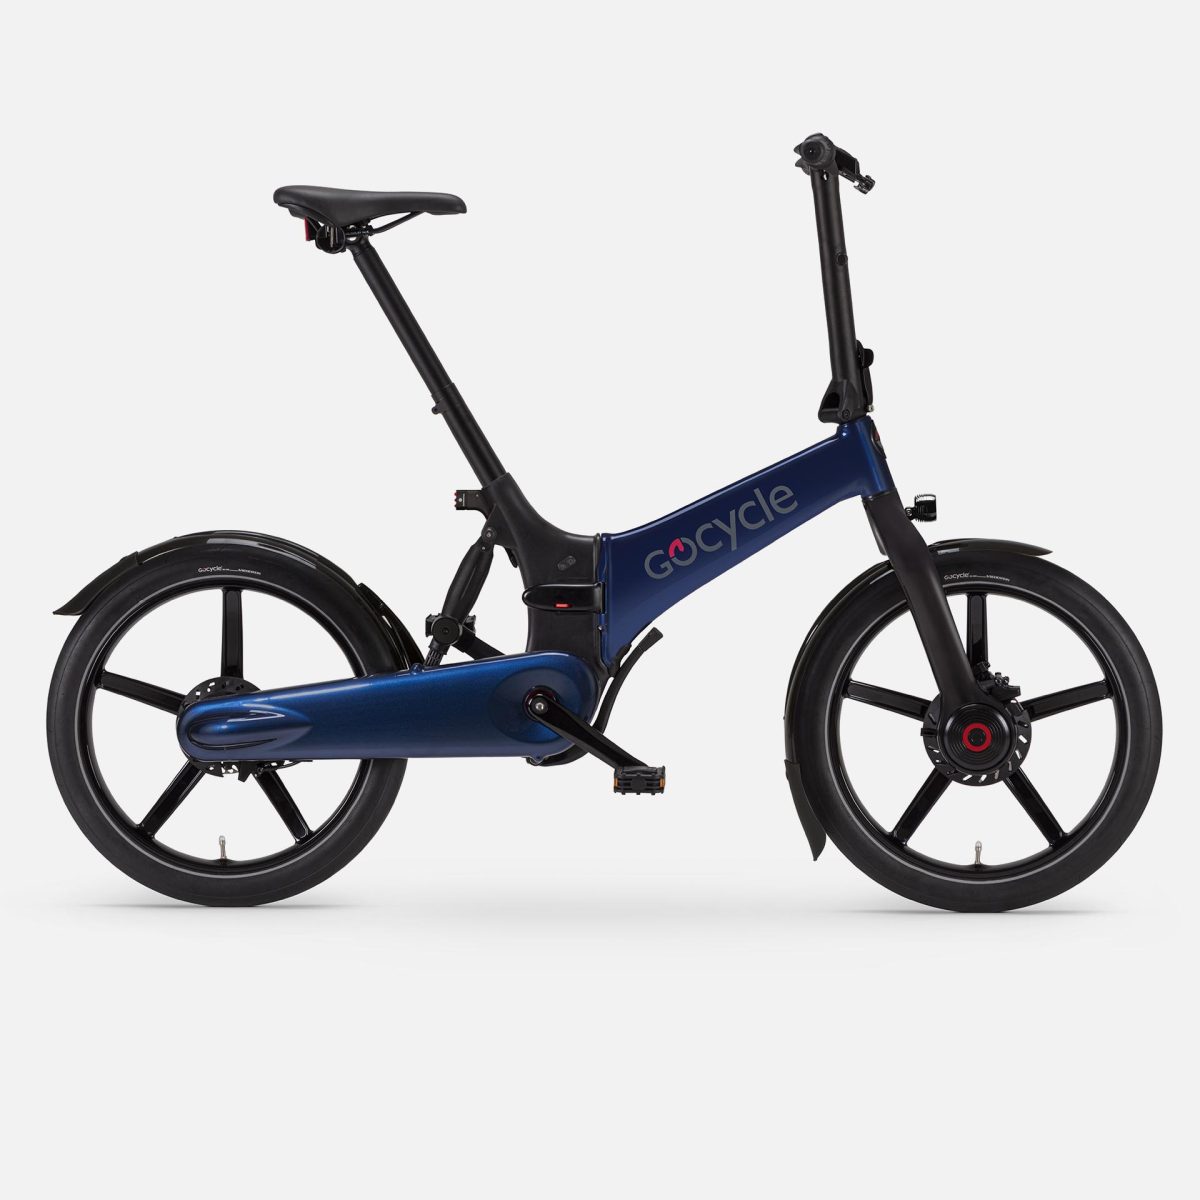 Gocycle G4 electric bike, in blue, side view